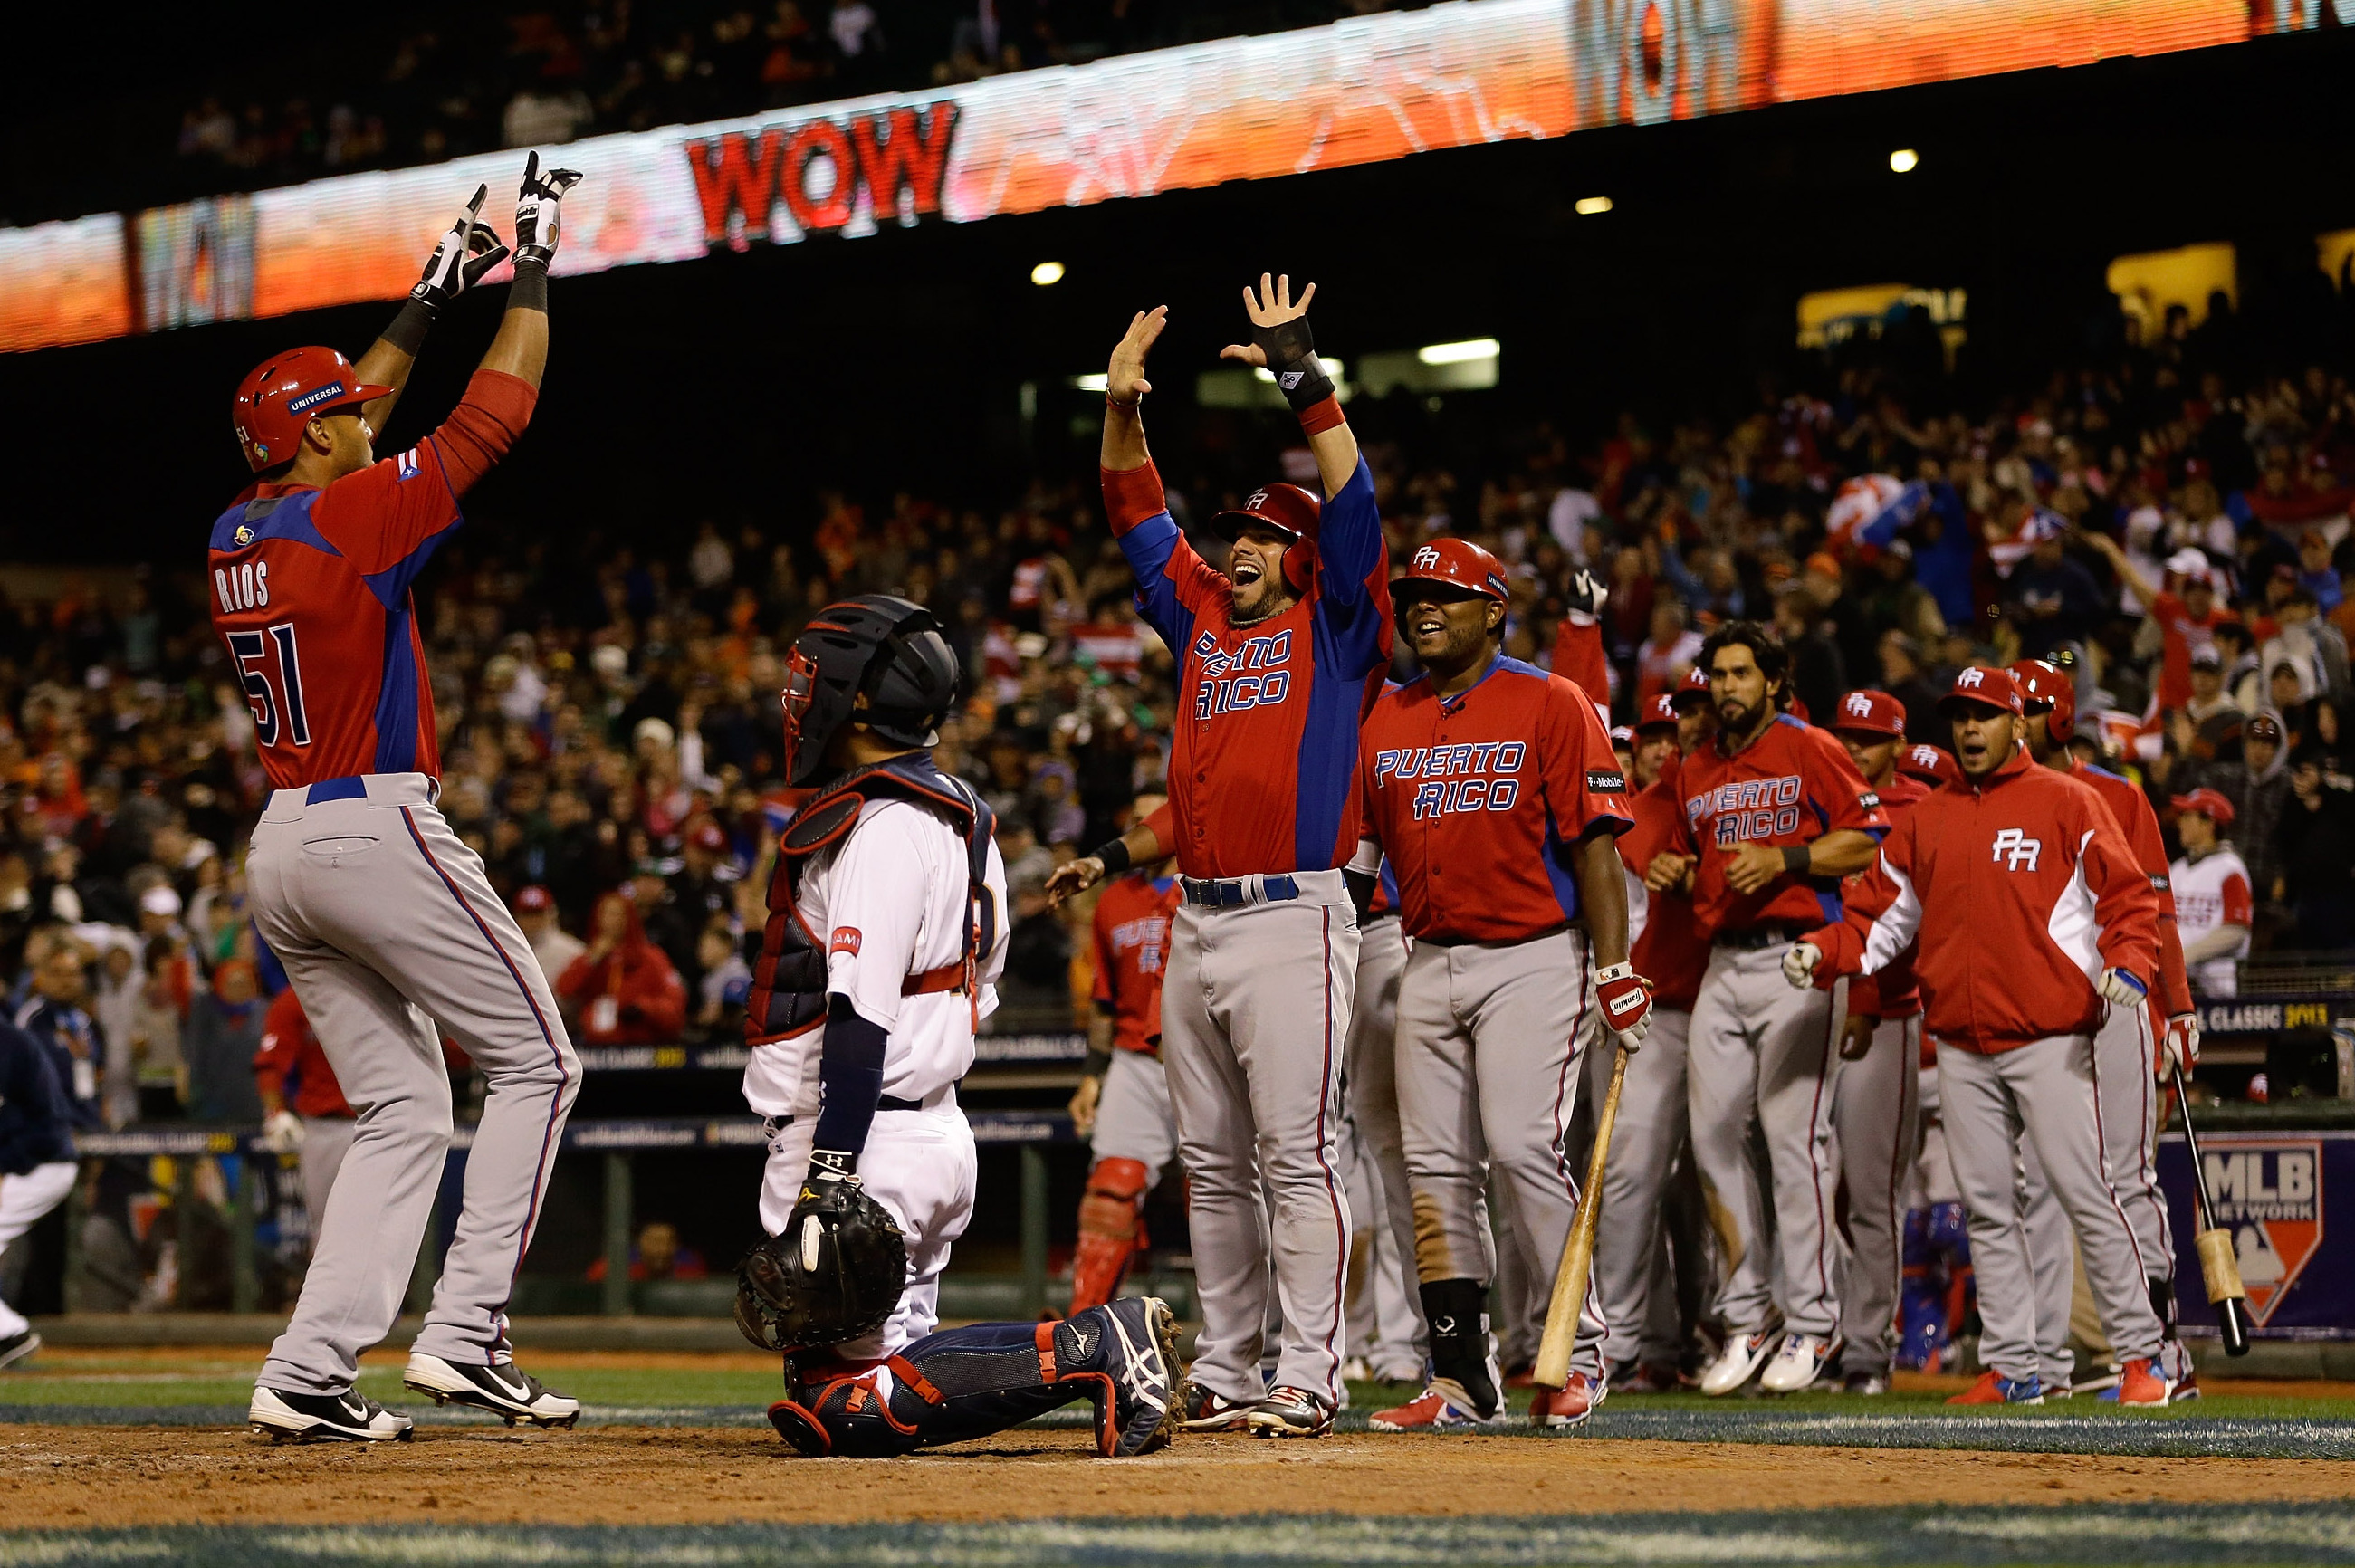 Yadier Molina homers to lead Puerto Rico over Dominicans, 3-1